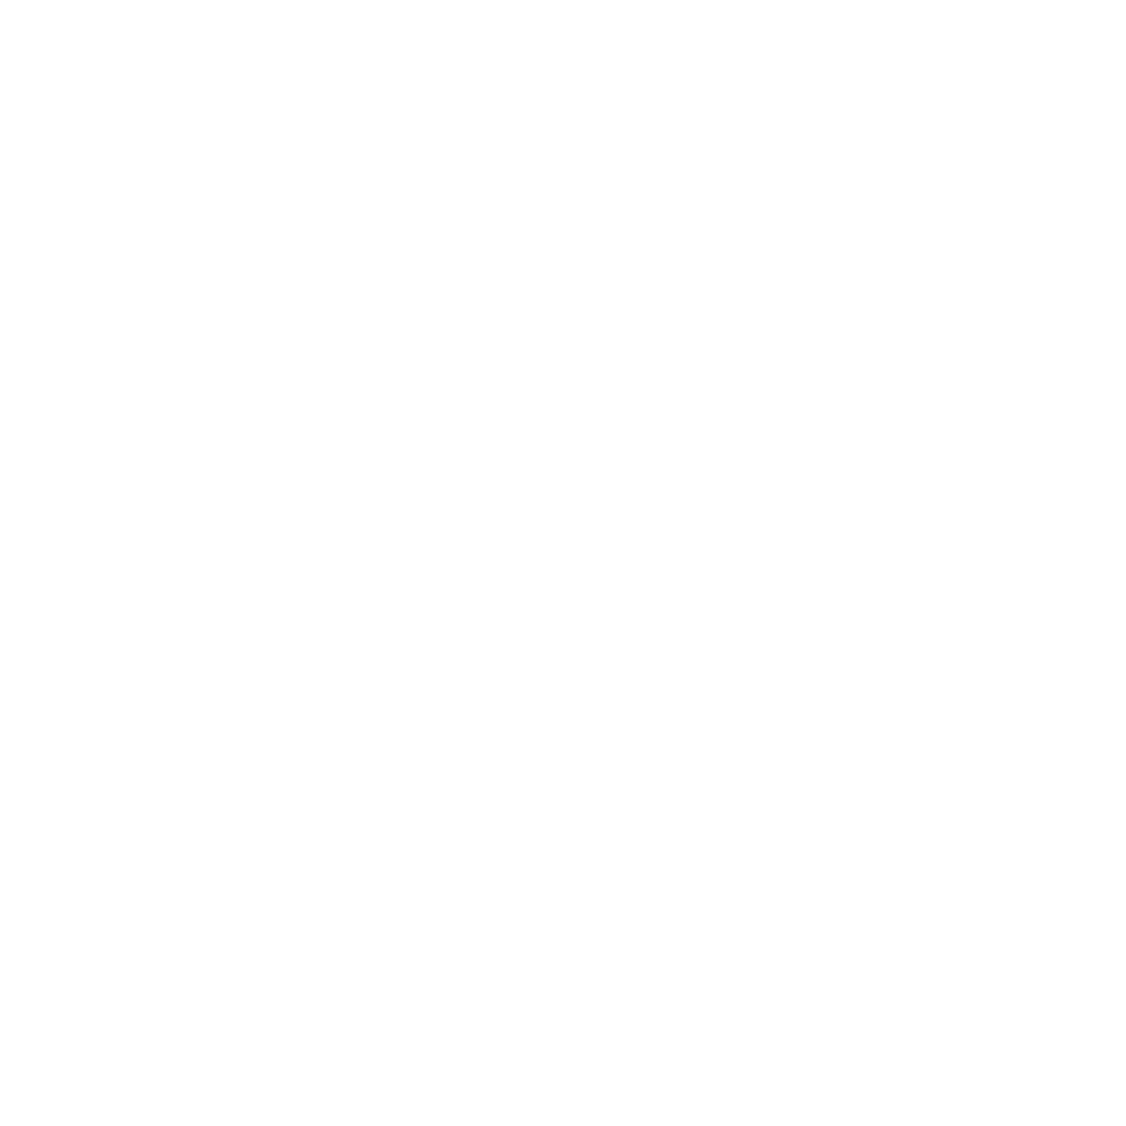 CGear-Icons_White-Hammock.png